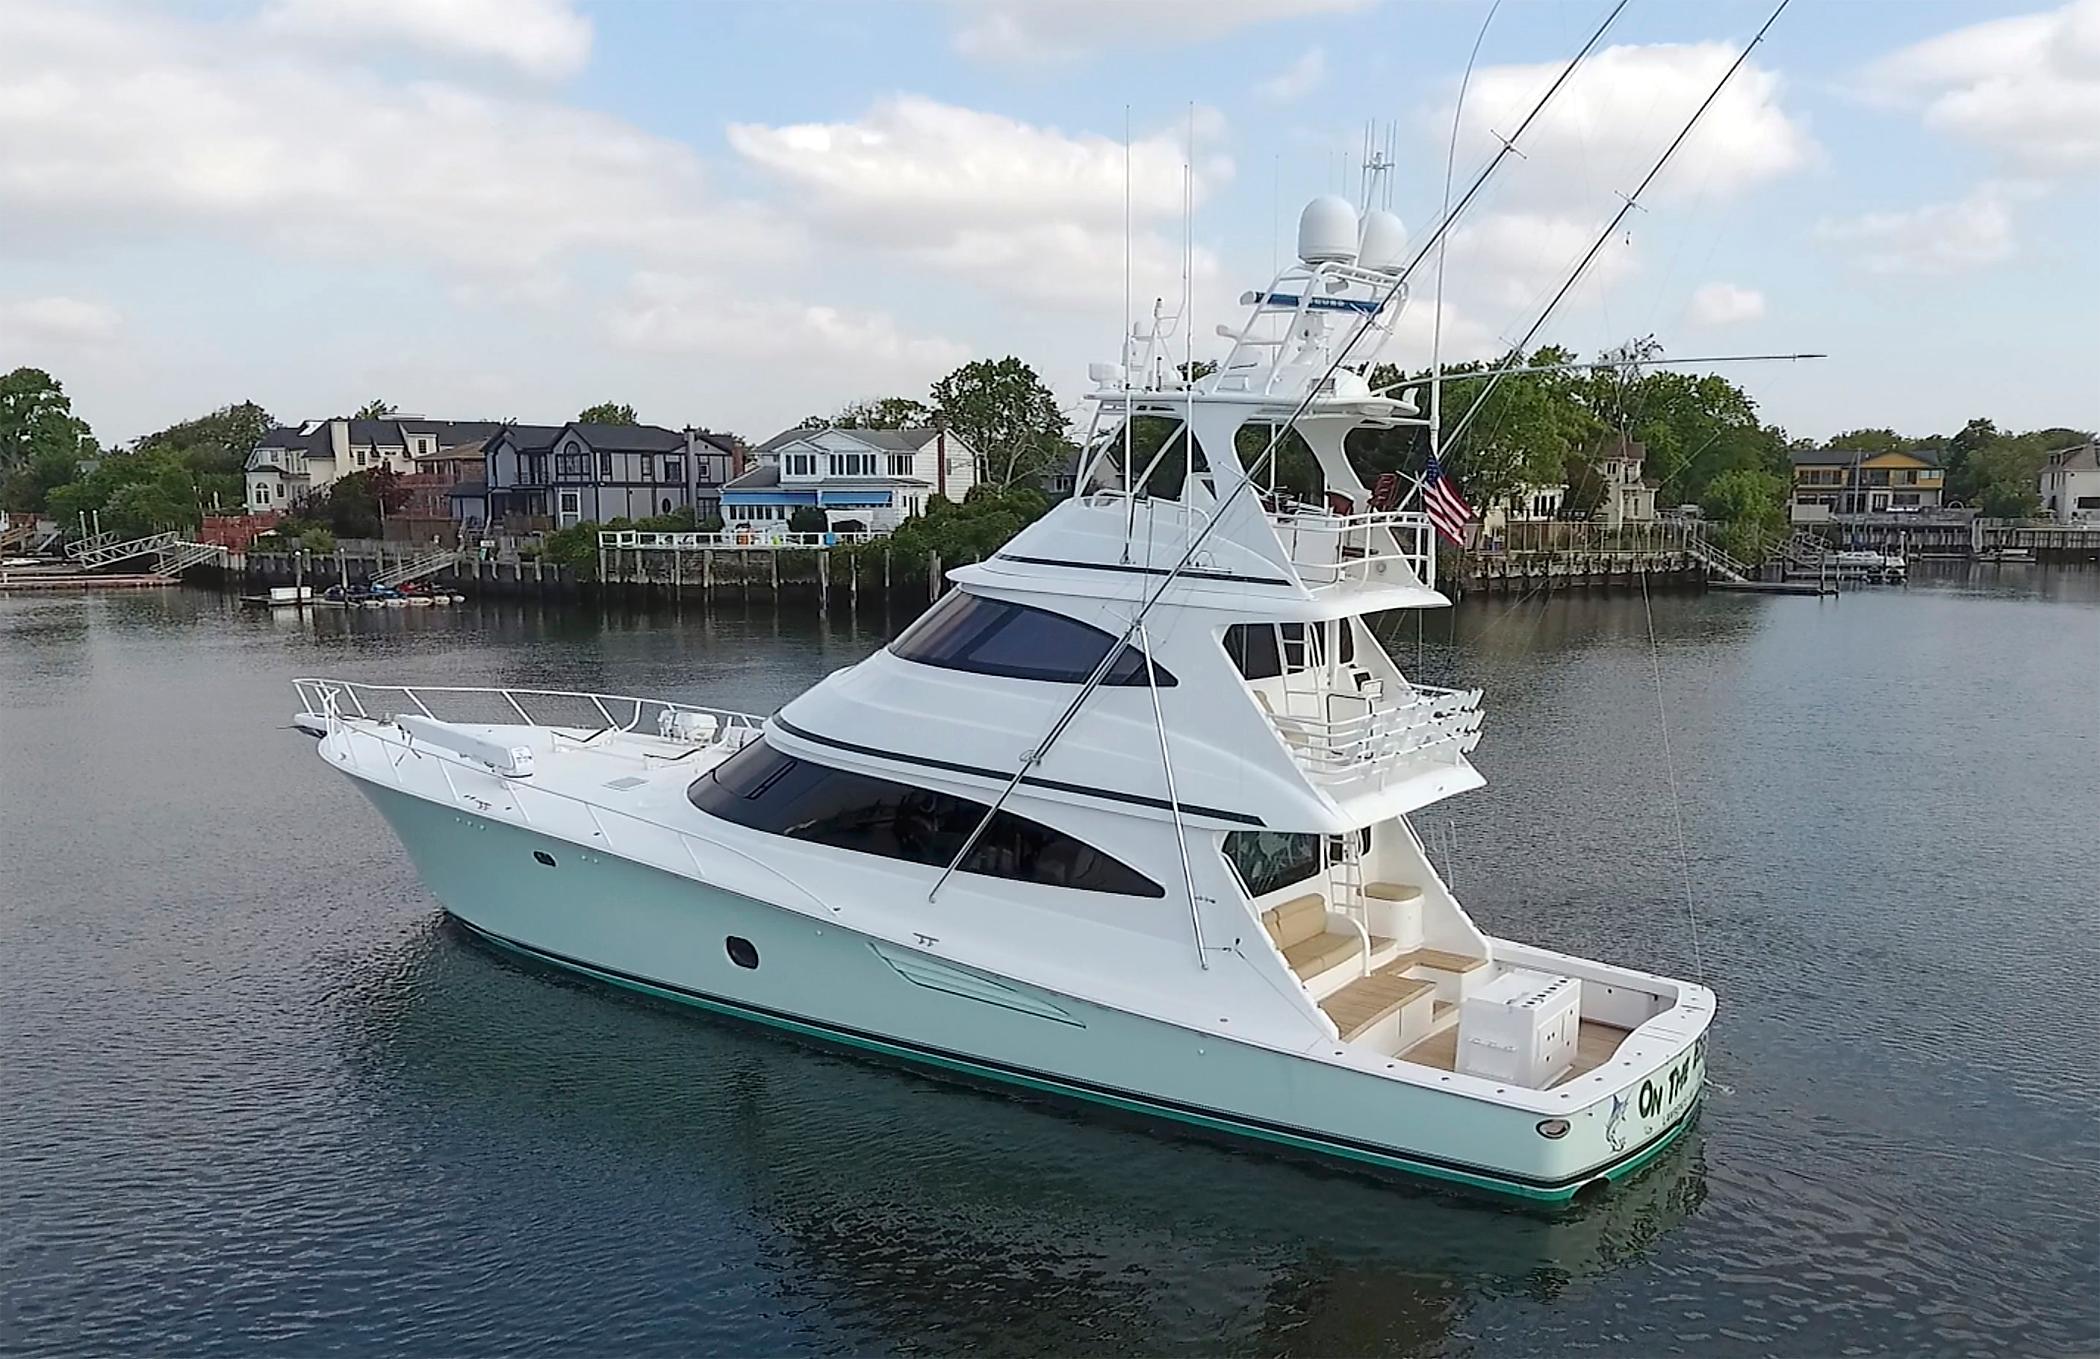 On The Edge Yacht for Sale  80 Viking Yachts Lawrence, NY